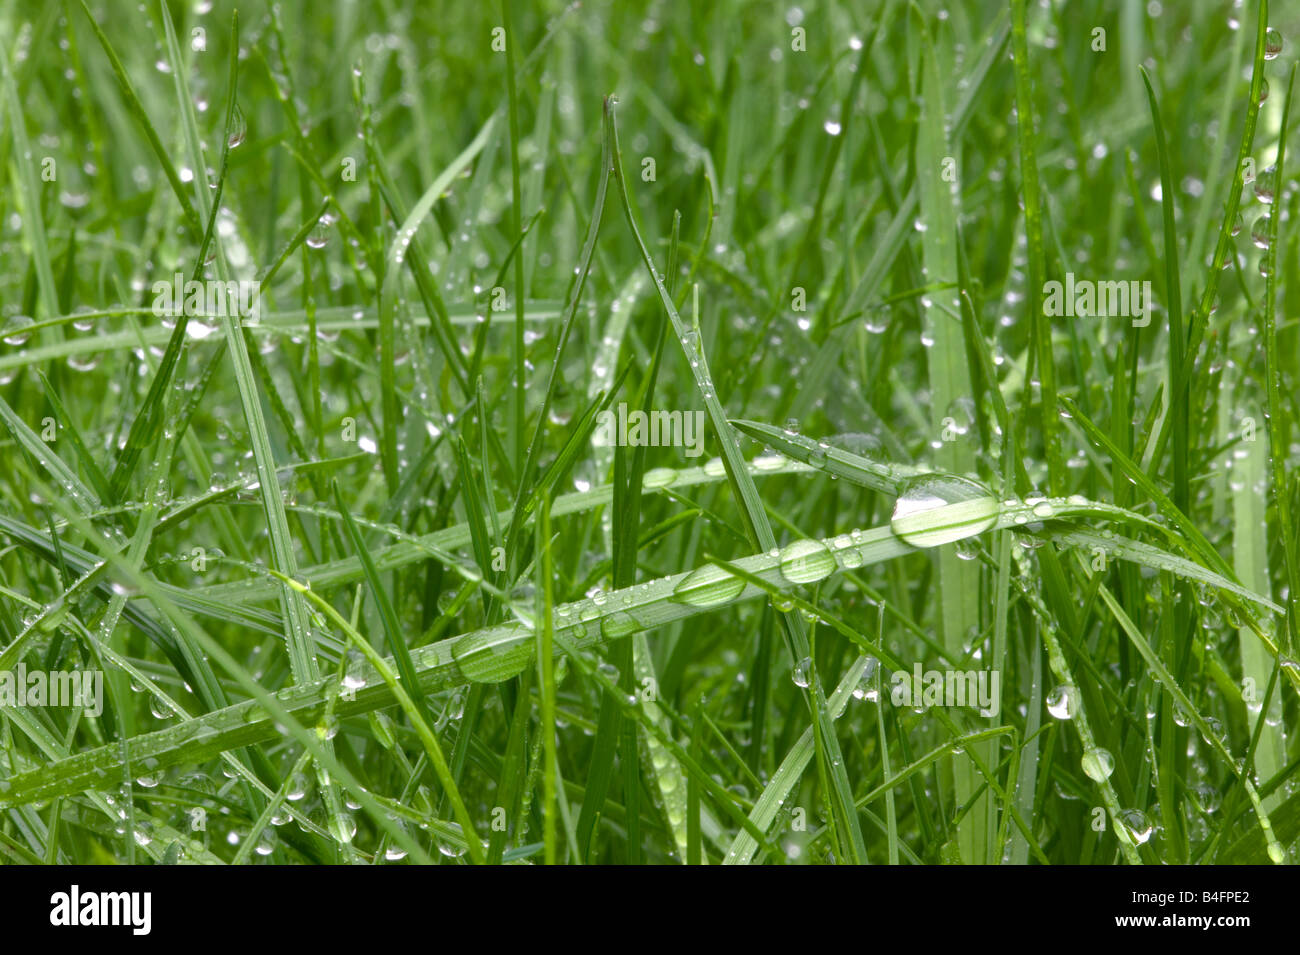 Wet green grass with water droplets on Stock Photo